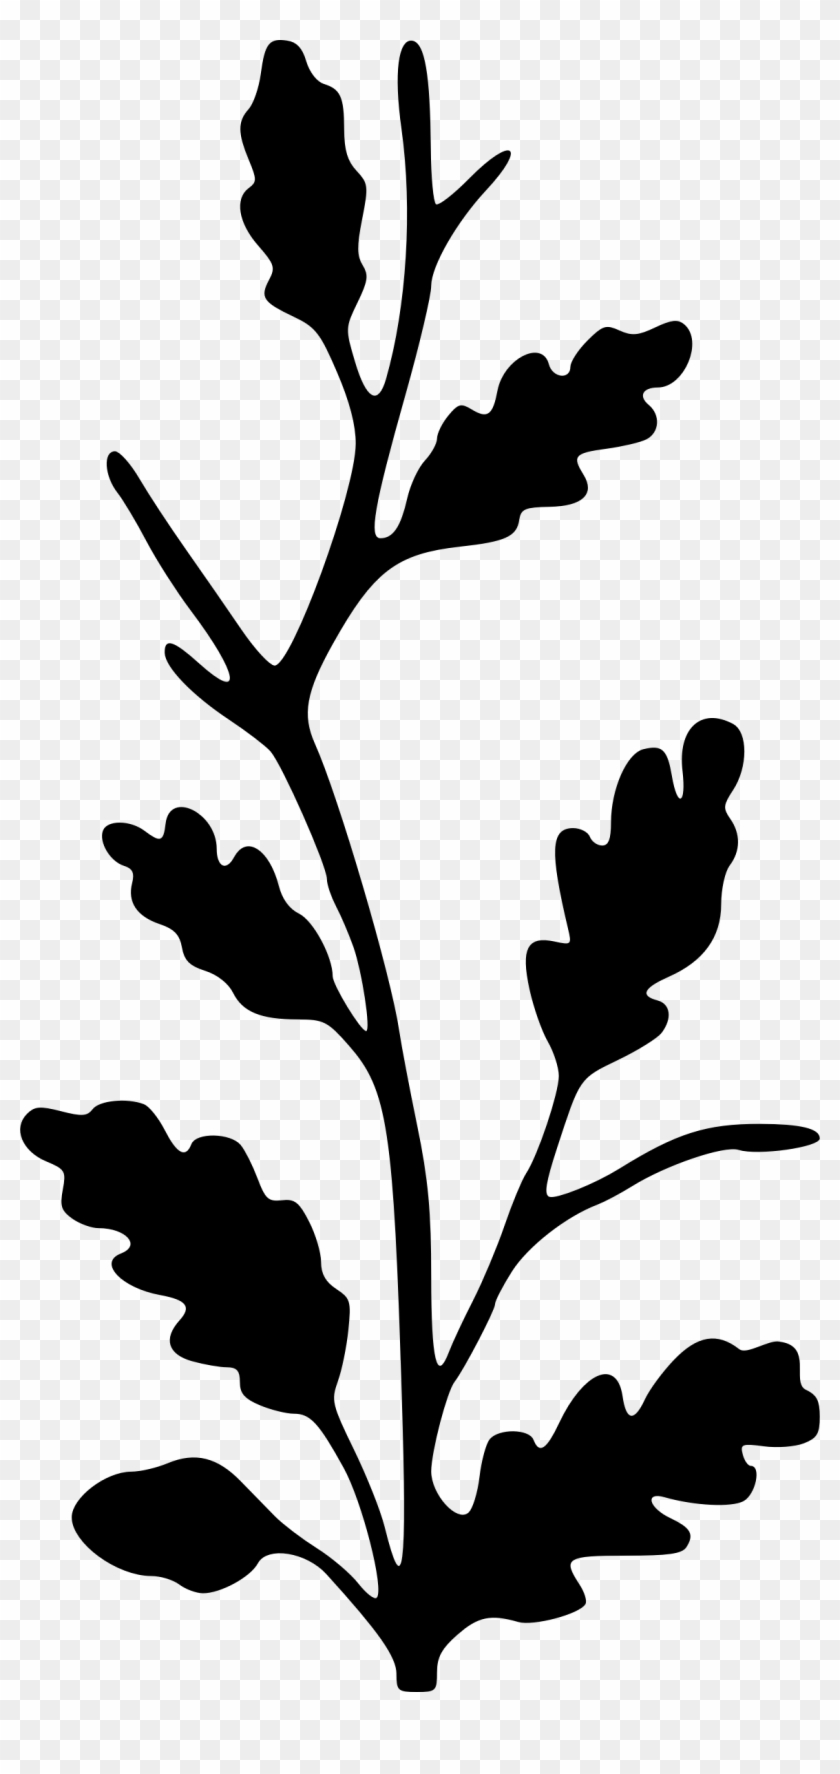 Big Image - Branch With Leaves Silhouette Svg Clipart #850035